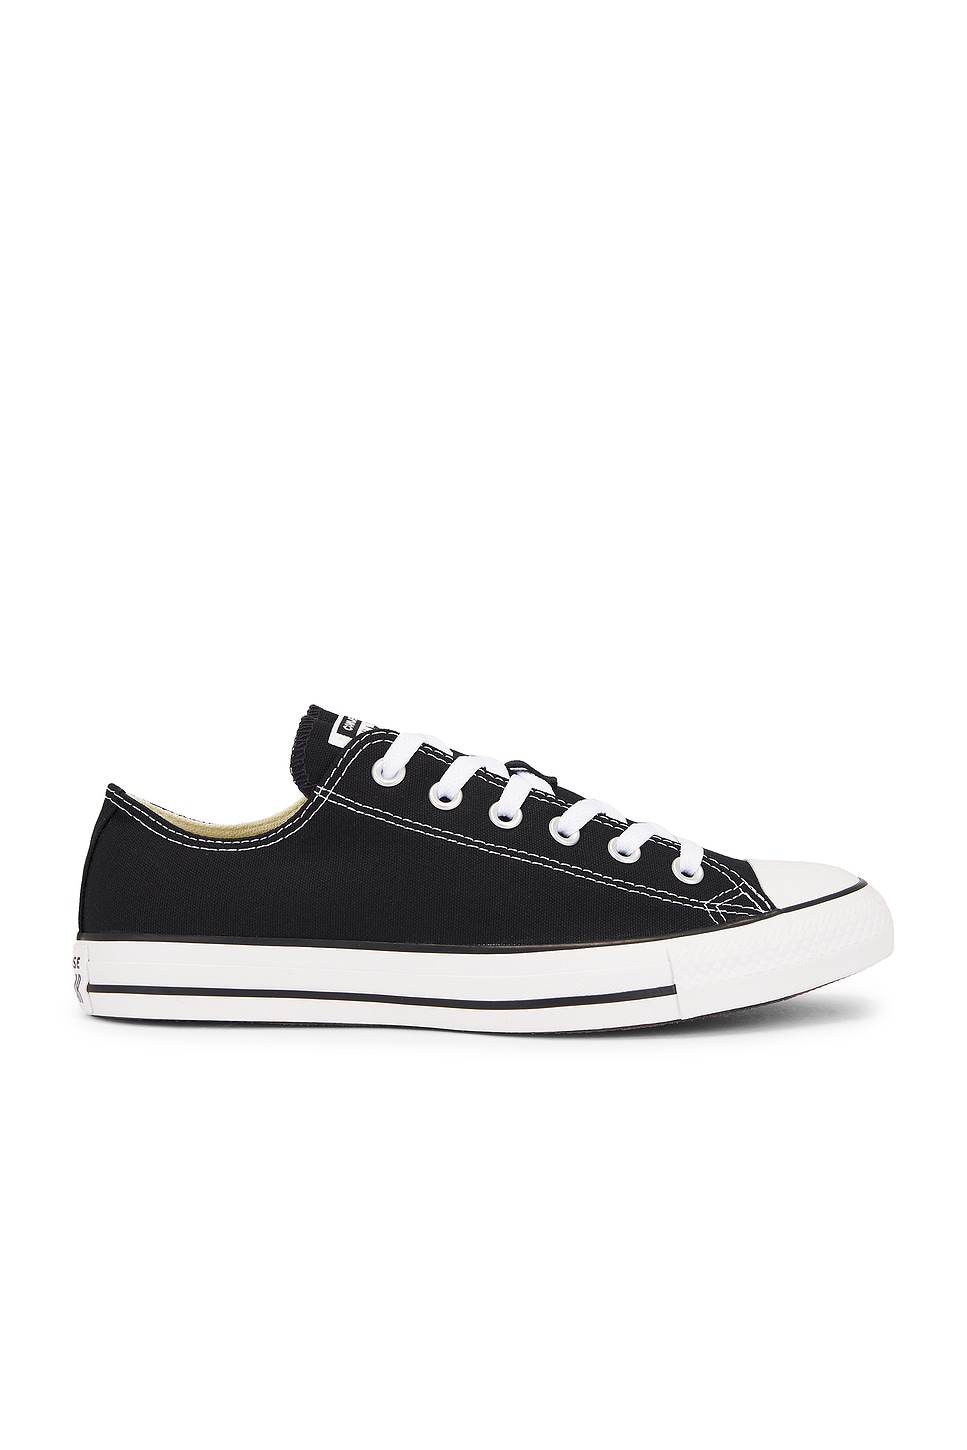 Image 1 of Converse Chuck Taylor All Star Classic in Black